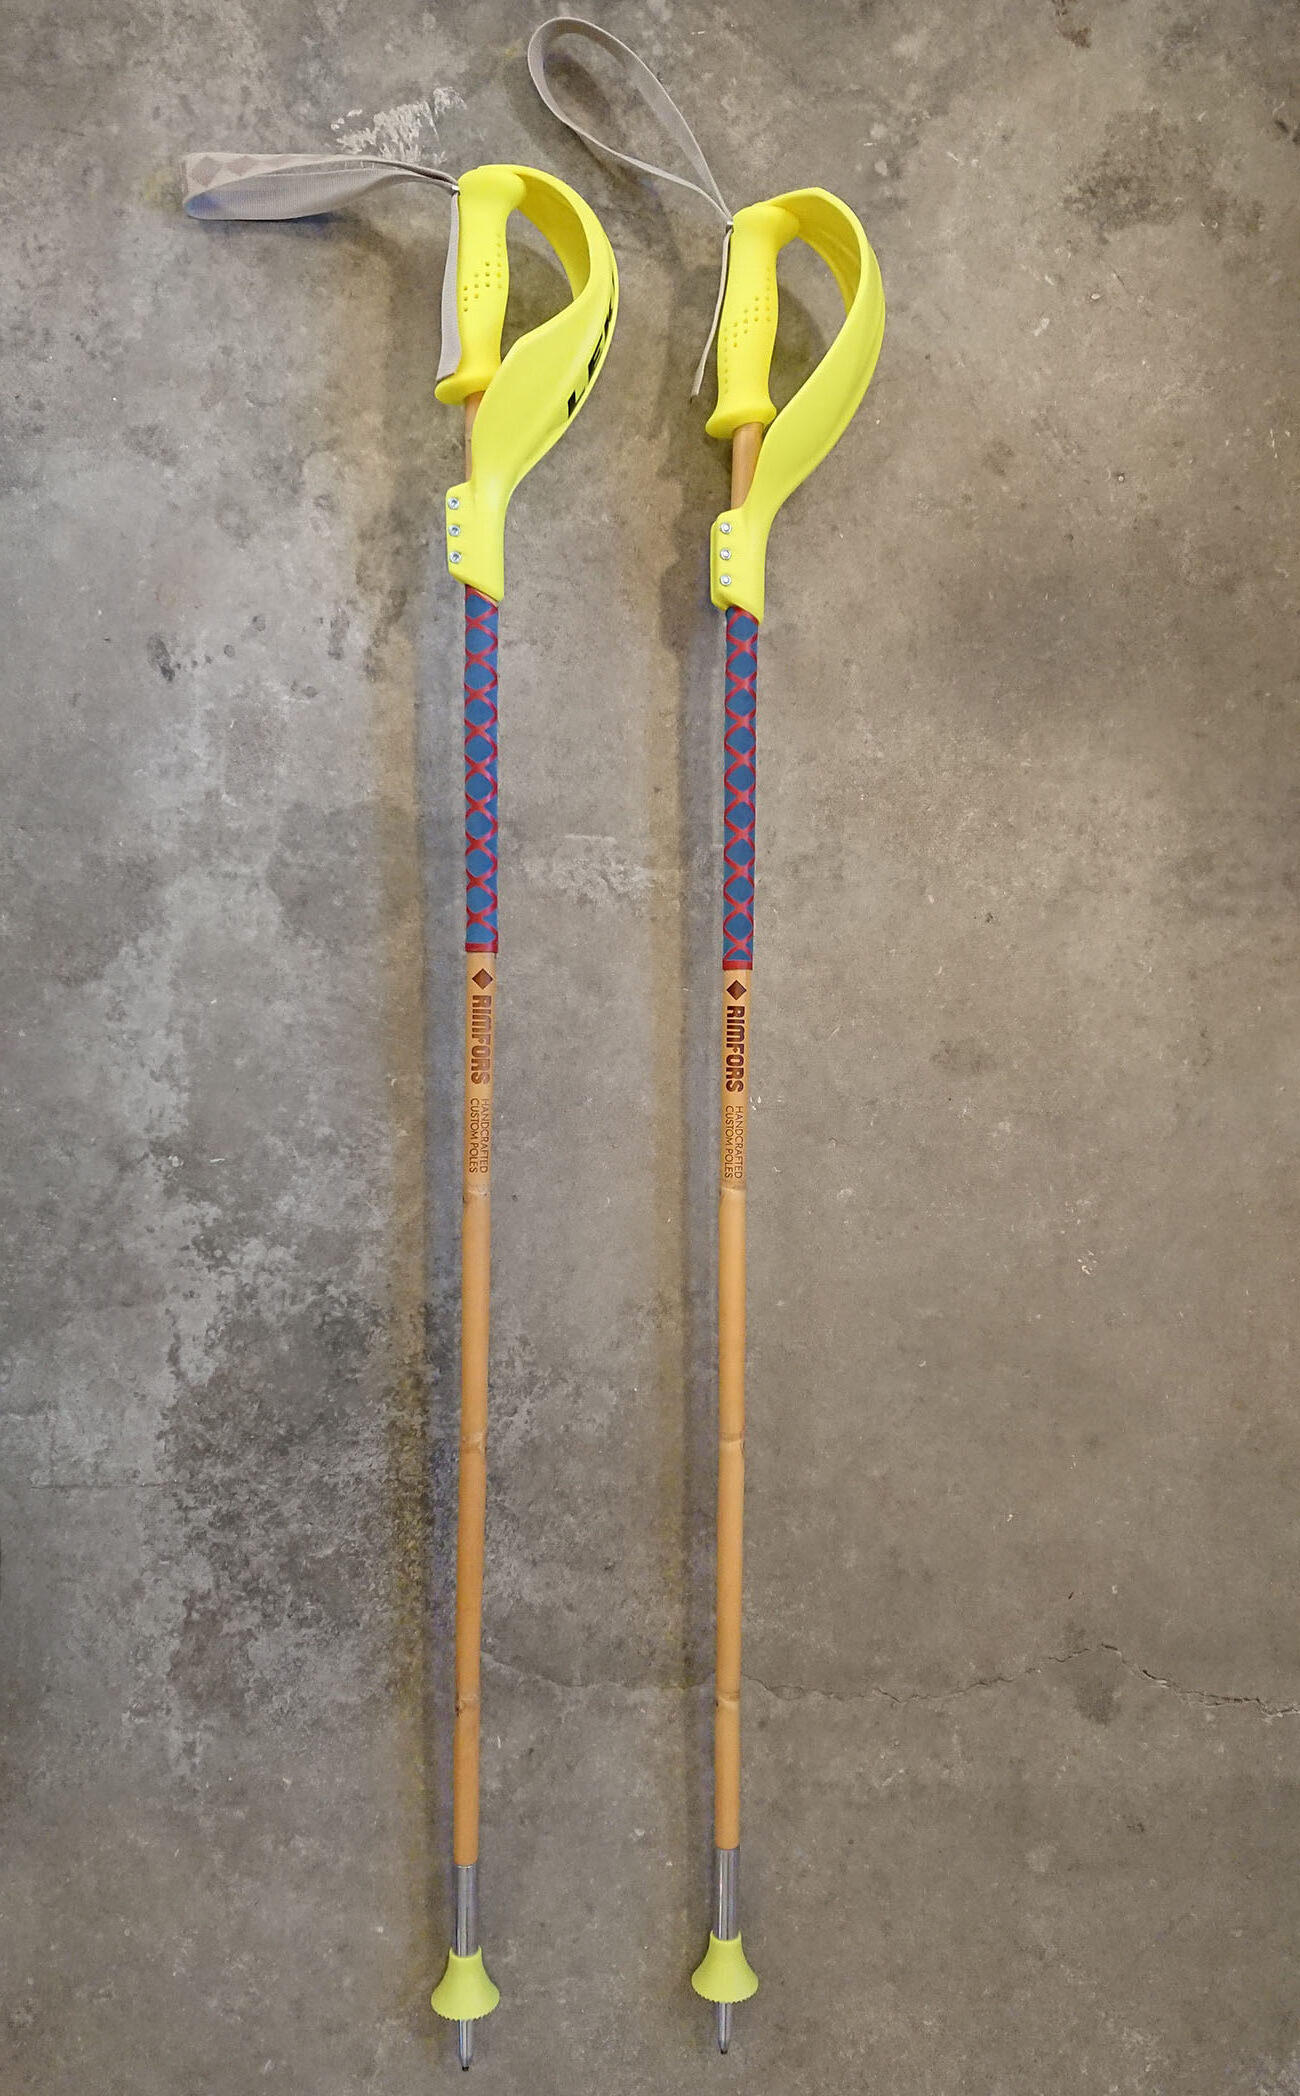 Alpine SL bamboo ski poles for racing, with matching fluorescent yellow grips, baskets and punch guards for slalom gates.